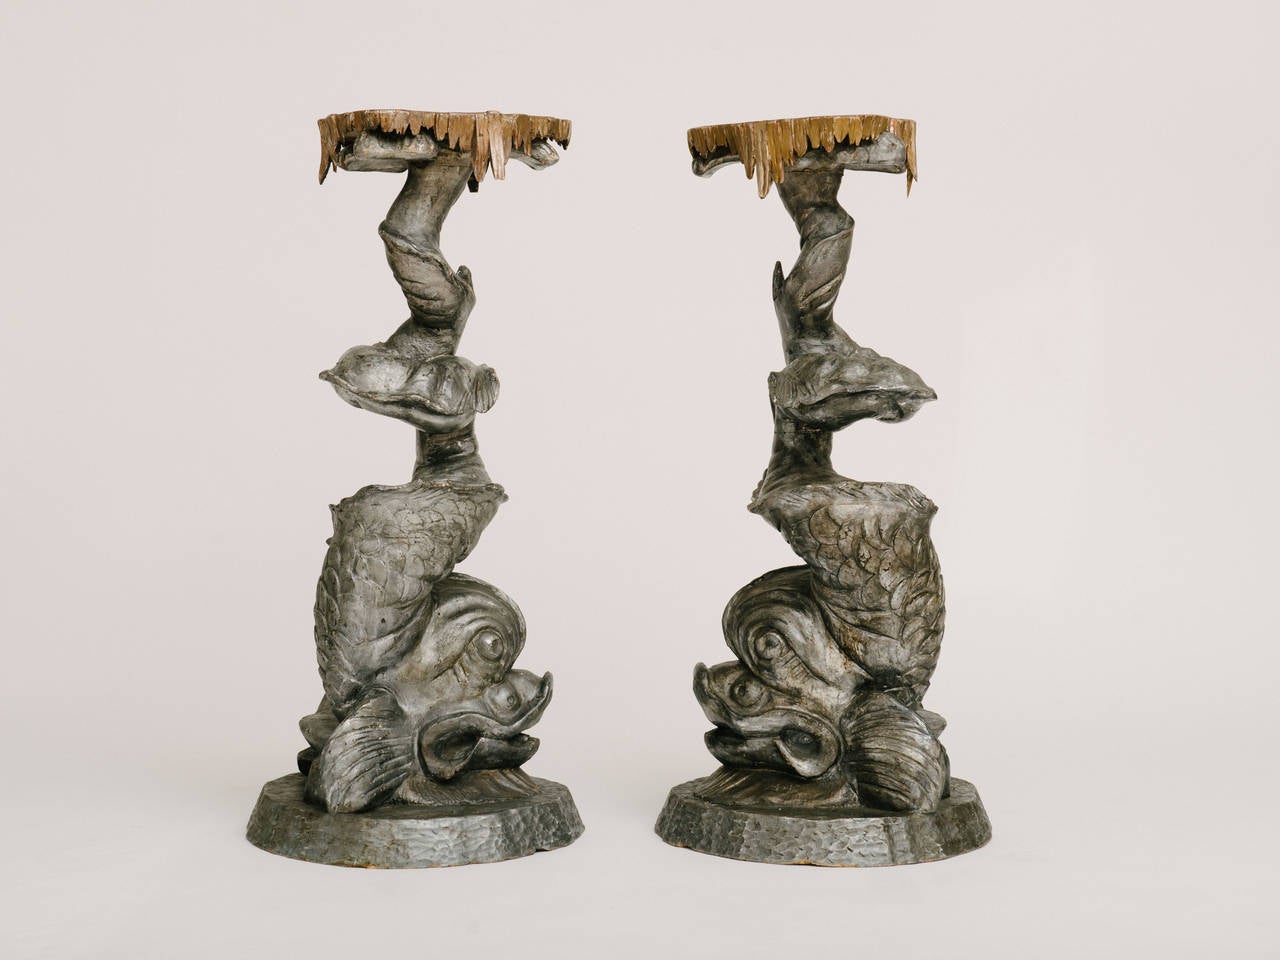 Pair of silver gilt carved Venetian grotto dolphin pedestals. Measures: 41